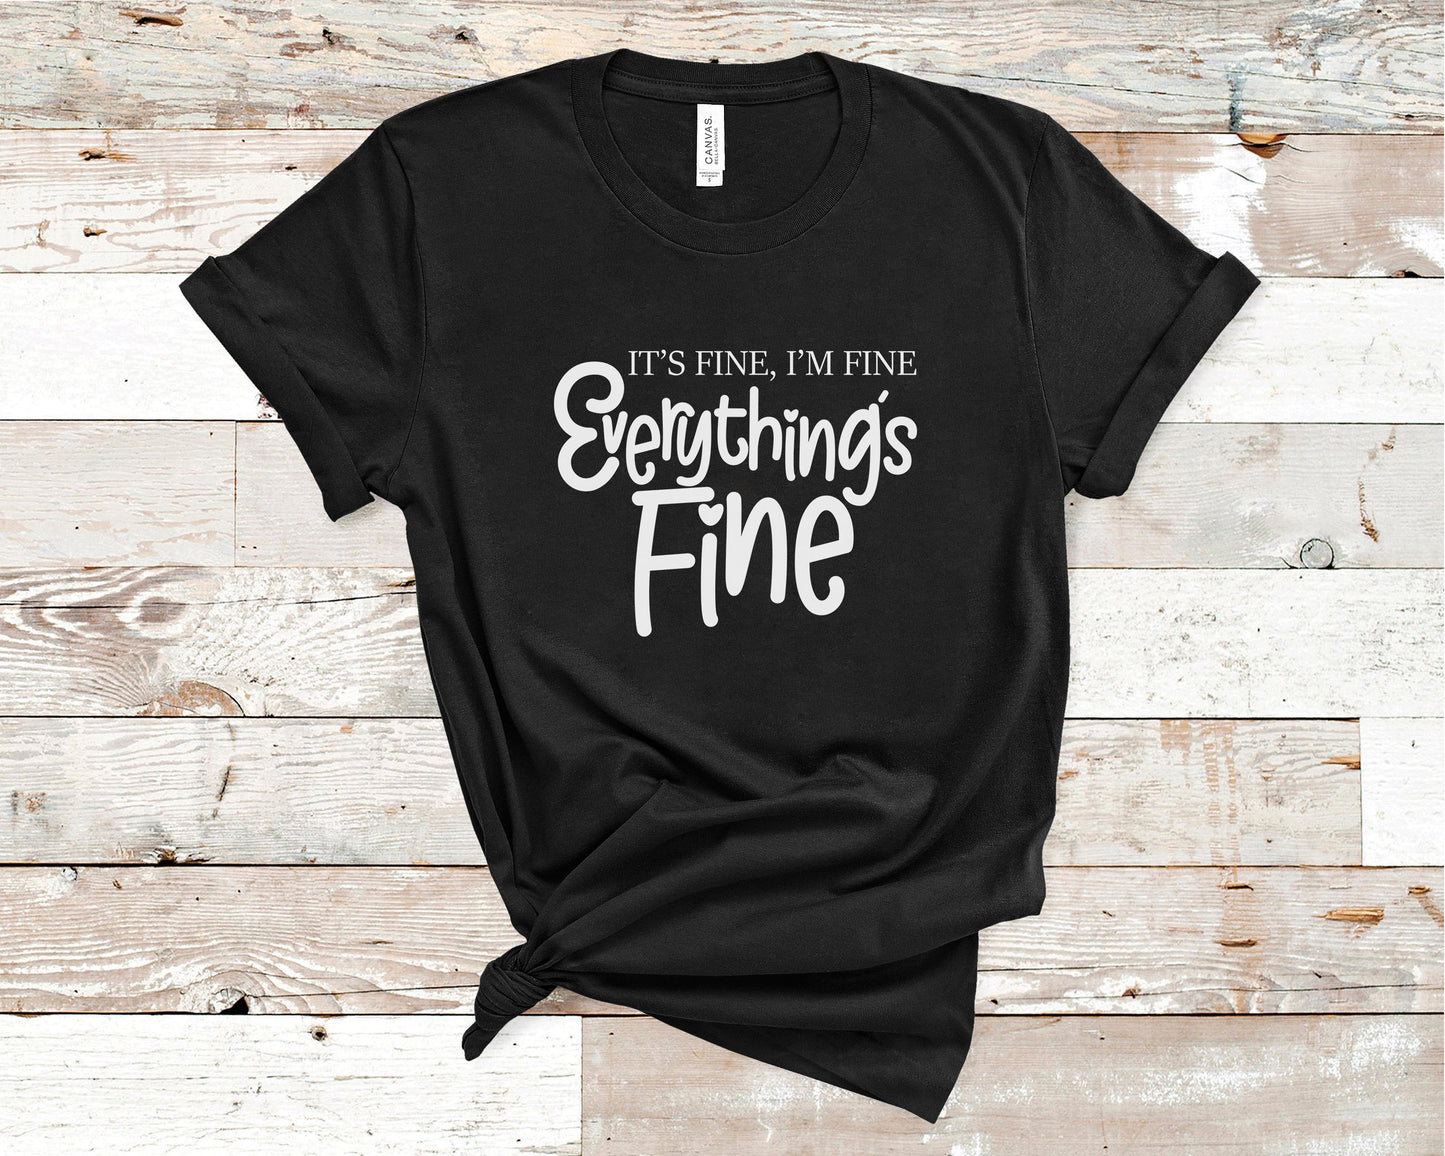 It's Fine I'm Fine Everything's Fine - Funny/ Sarcastic